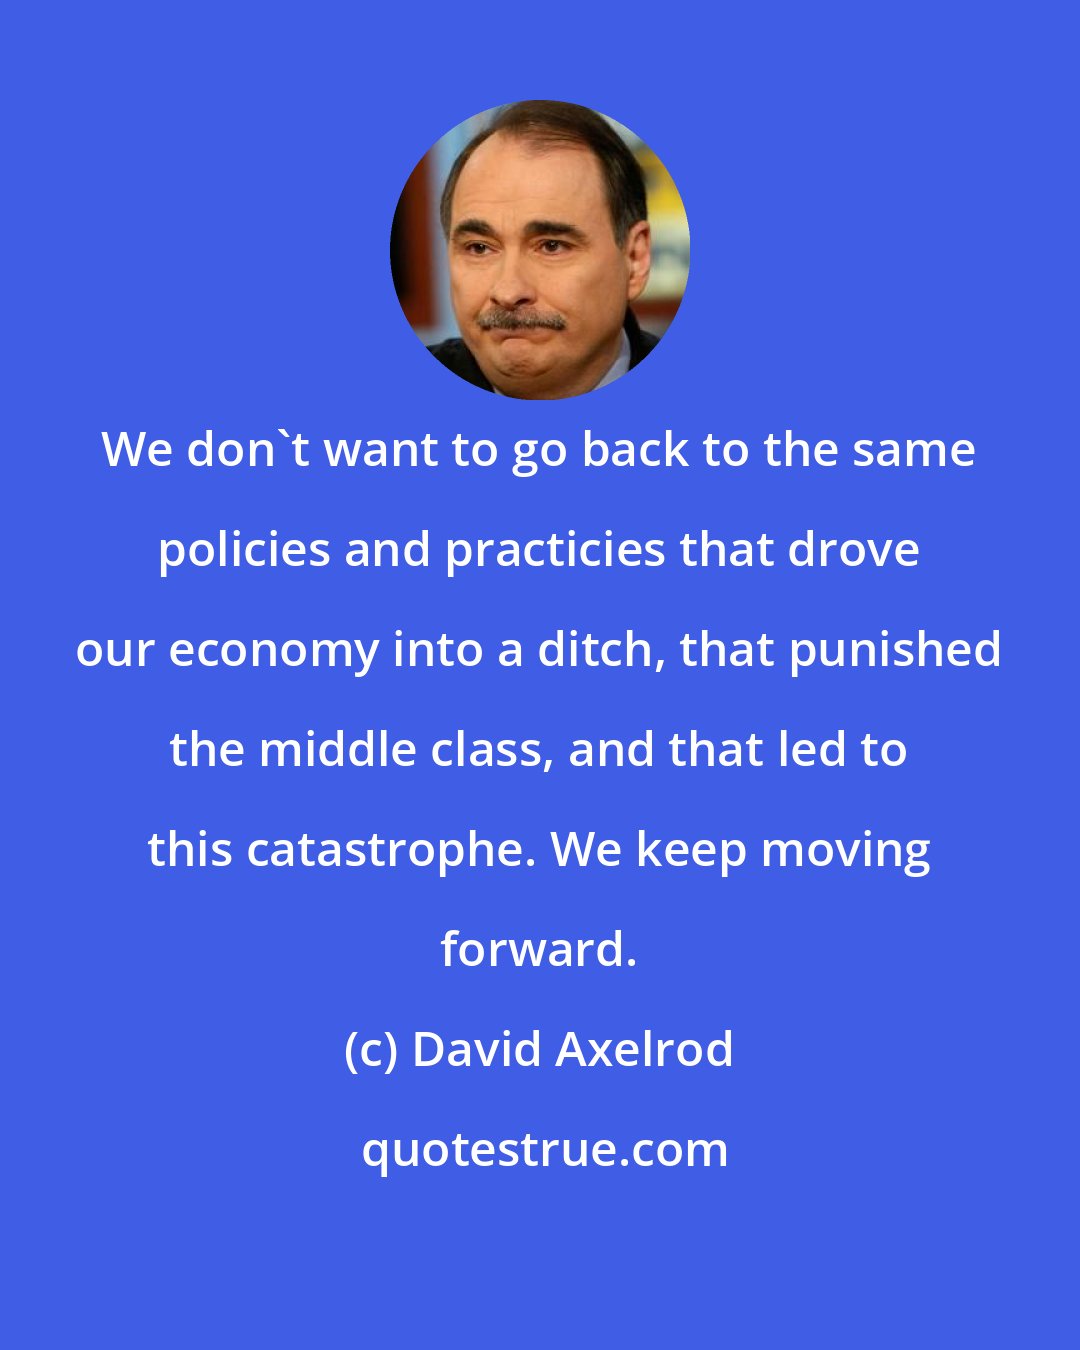 David Axelrod: We don't want to go back to the same policies and practicies that drove our economy into a ditch, that punished the middle class, and that led to this catastrophe. We keep moving forward.